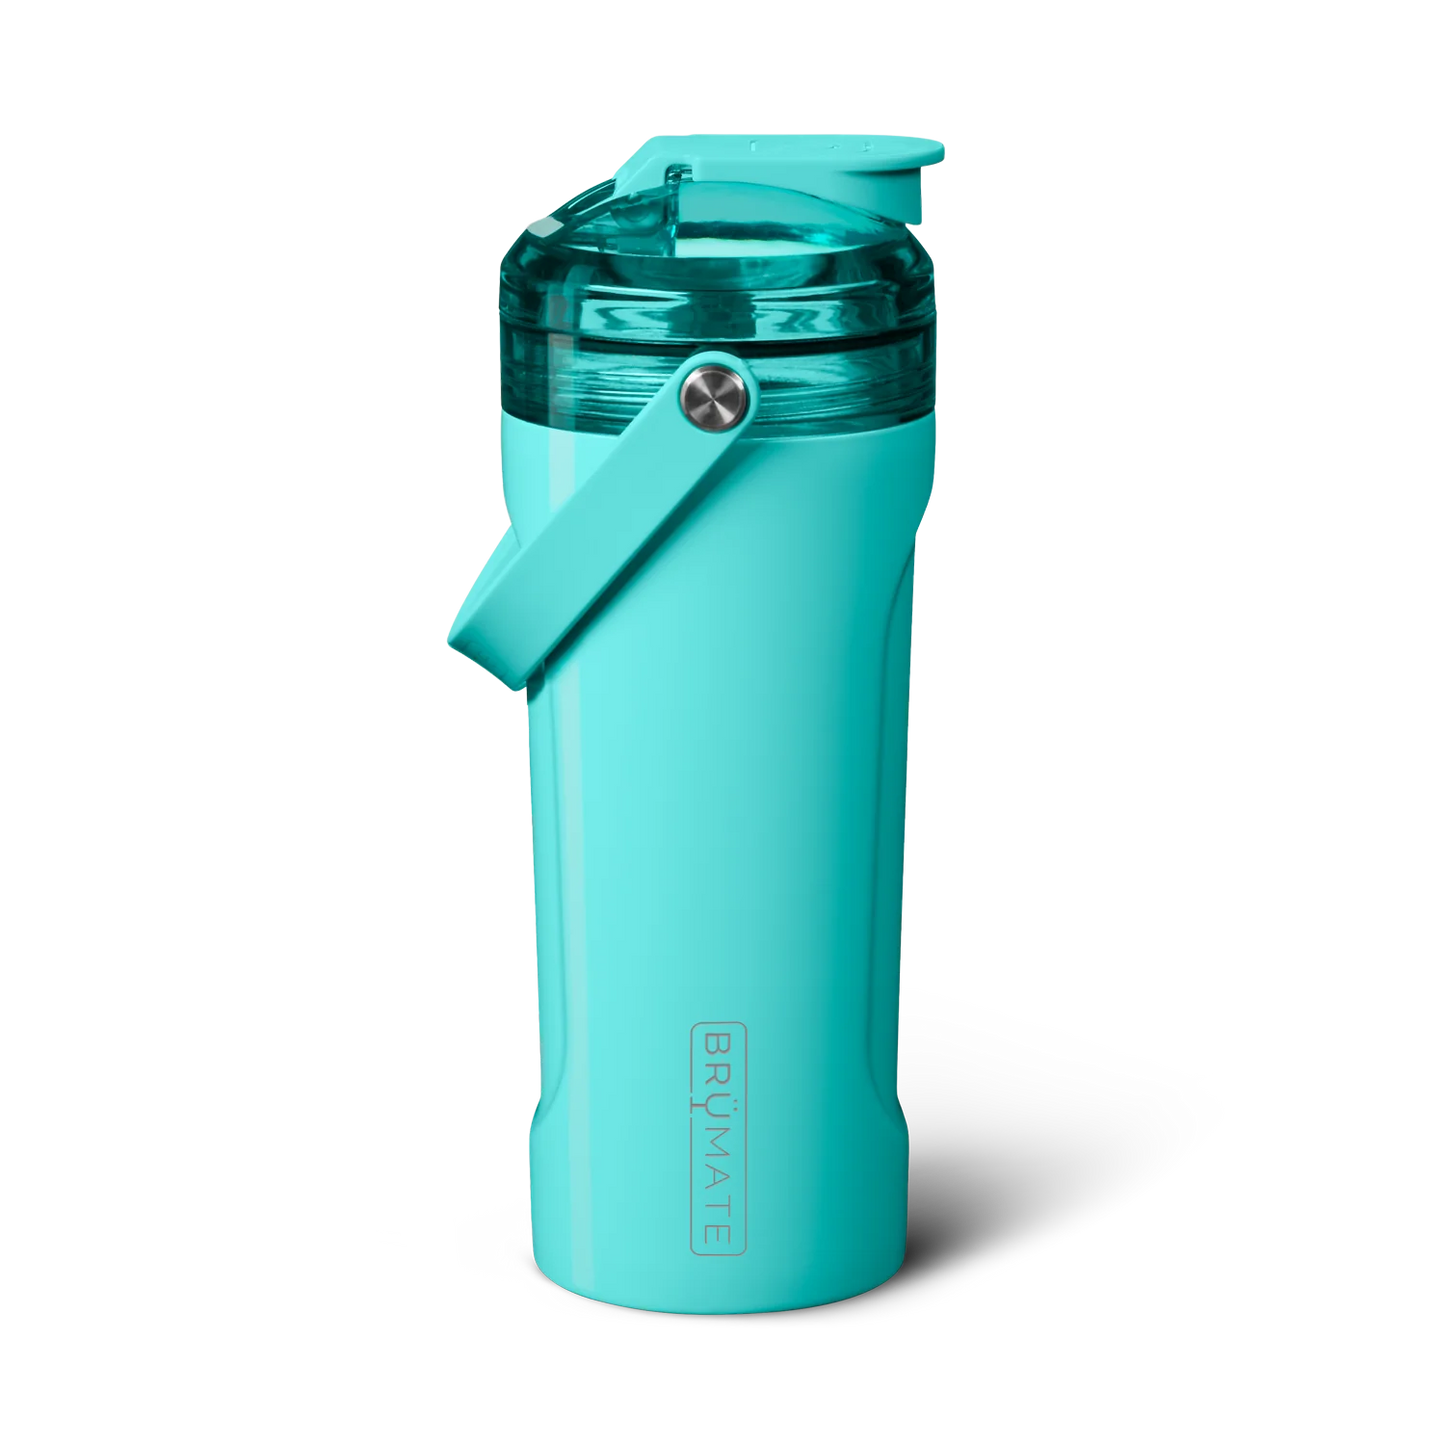 The MultiShaker is made for elevating your fitness journey. Our built-in patent-pending agitator blends your shakes, greens, and powders without any clumps, while also serving as a water infuser for herbs and fruits. It includes our BevGuard™ insulation to keep ice for 24+ hours, a spill-proof MagFlip™ lid, volume markings on the inside, a durable silicone handle, a non-slip base, and the ability to interchange tops with our MÜV or Straw Lids, making it perfect for any workout or adventure.(Aqua)